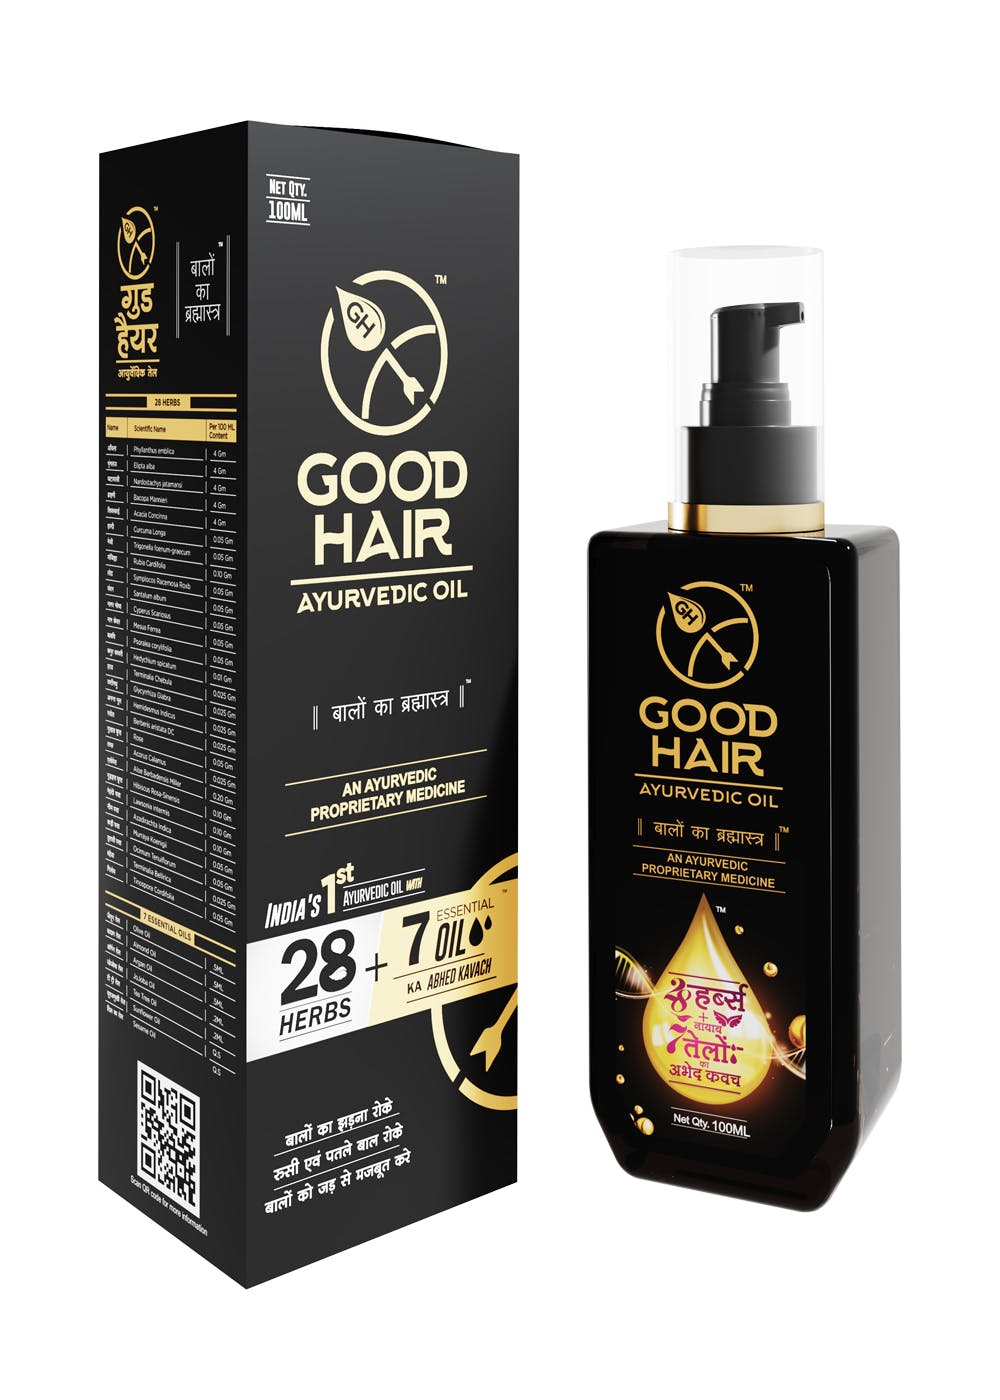 Buy online GH HAIR OIL 100ML at 20 discount only at wwwkaerin Save more  on GH HAIR OIL 100ML with kaer cash also enjoy fast free delivery same day  delivery 24 hr